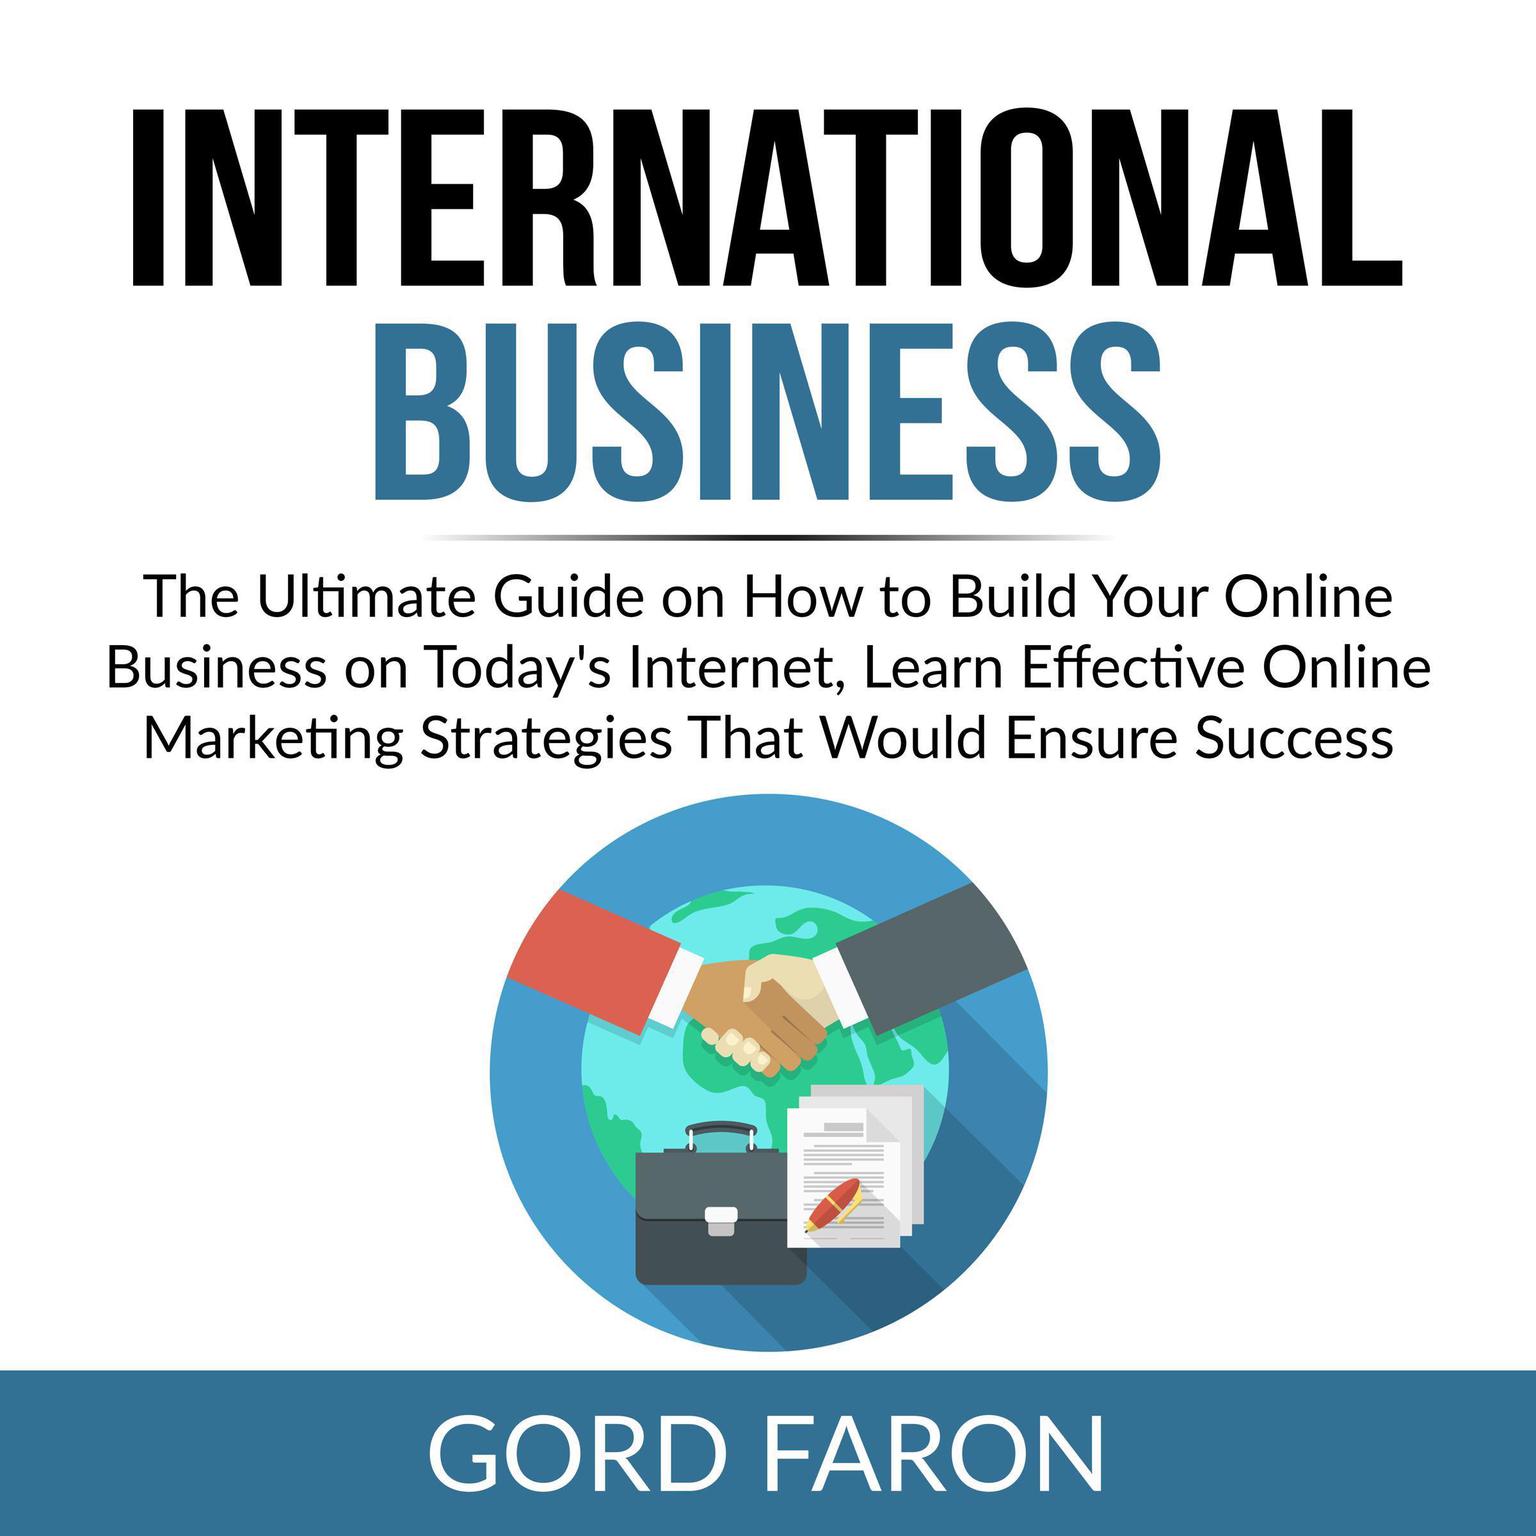 International Business: The Ultimate Guide on How to Build Your Online Business on Todays Internet, Learn Effective Online Marketing Strategies That Would Ensure Success  Audiobook, by Gord Faron